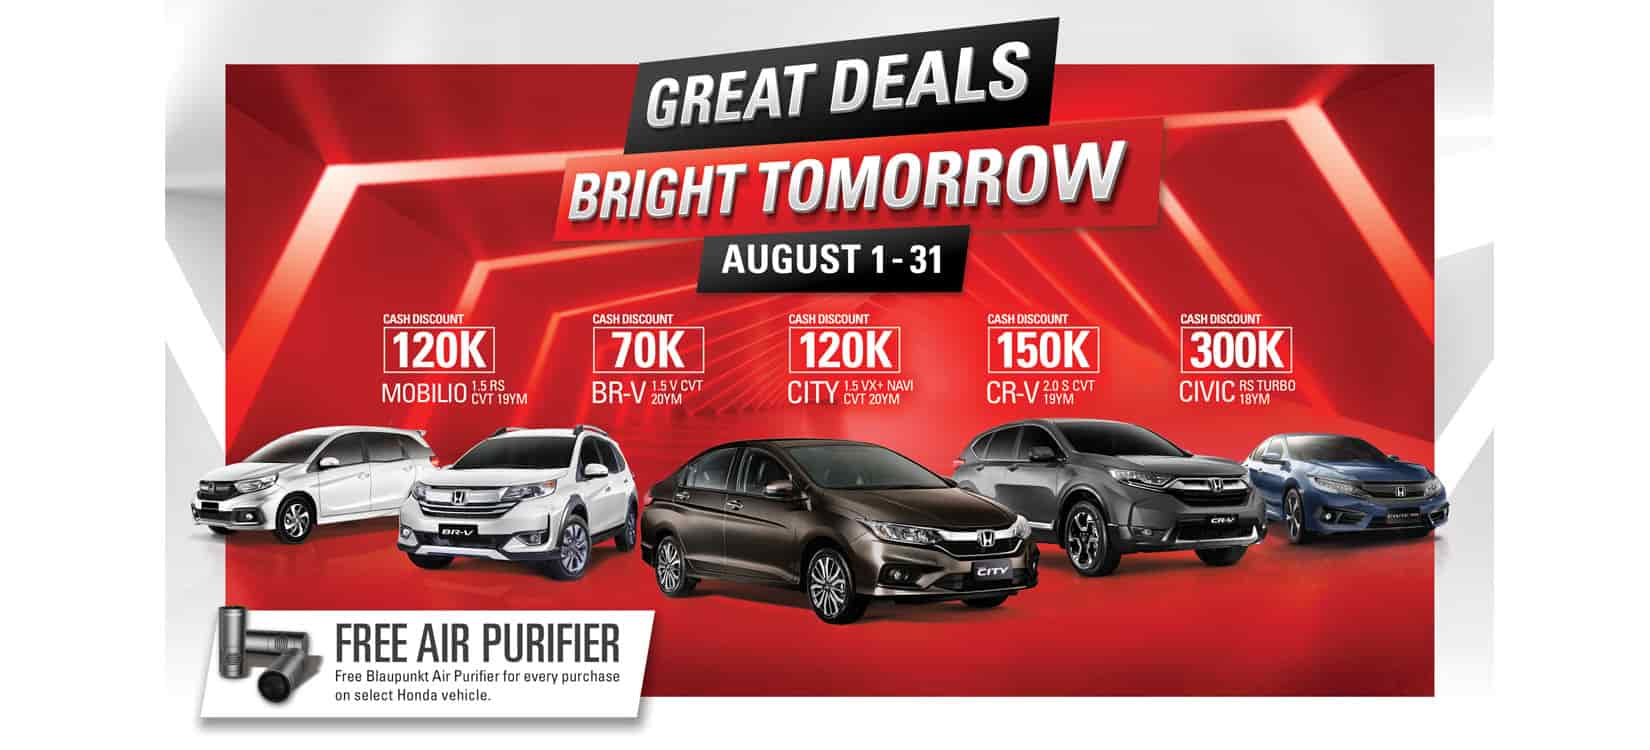 Honda continues huge cash discounts and great deals in August